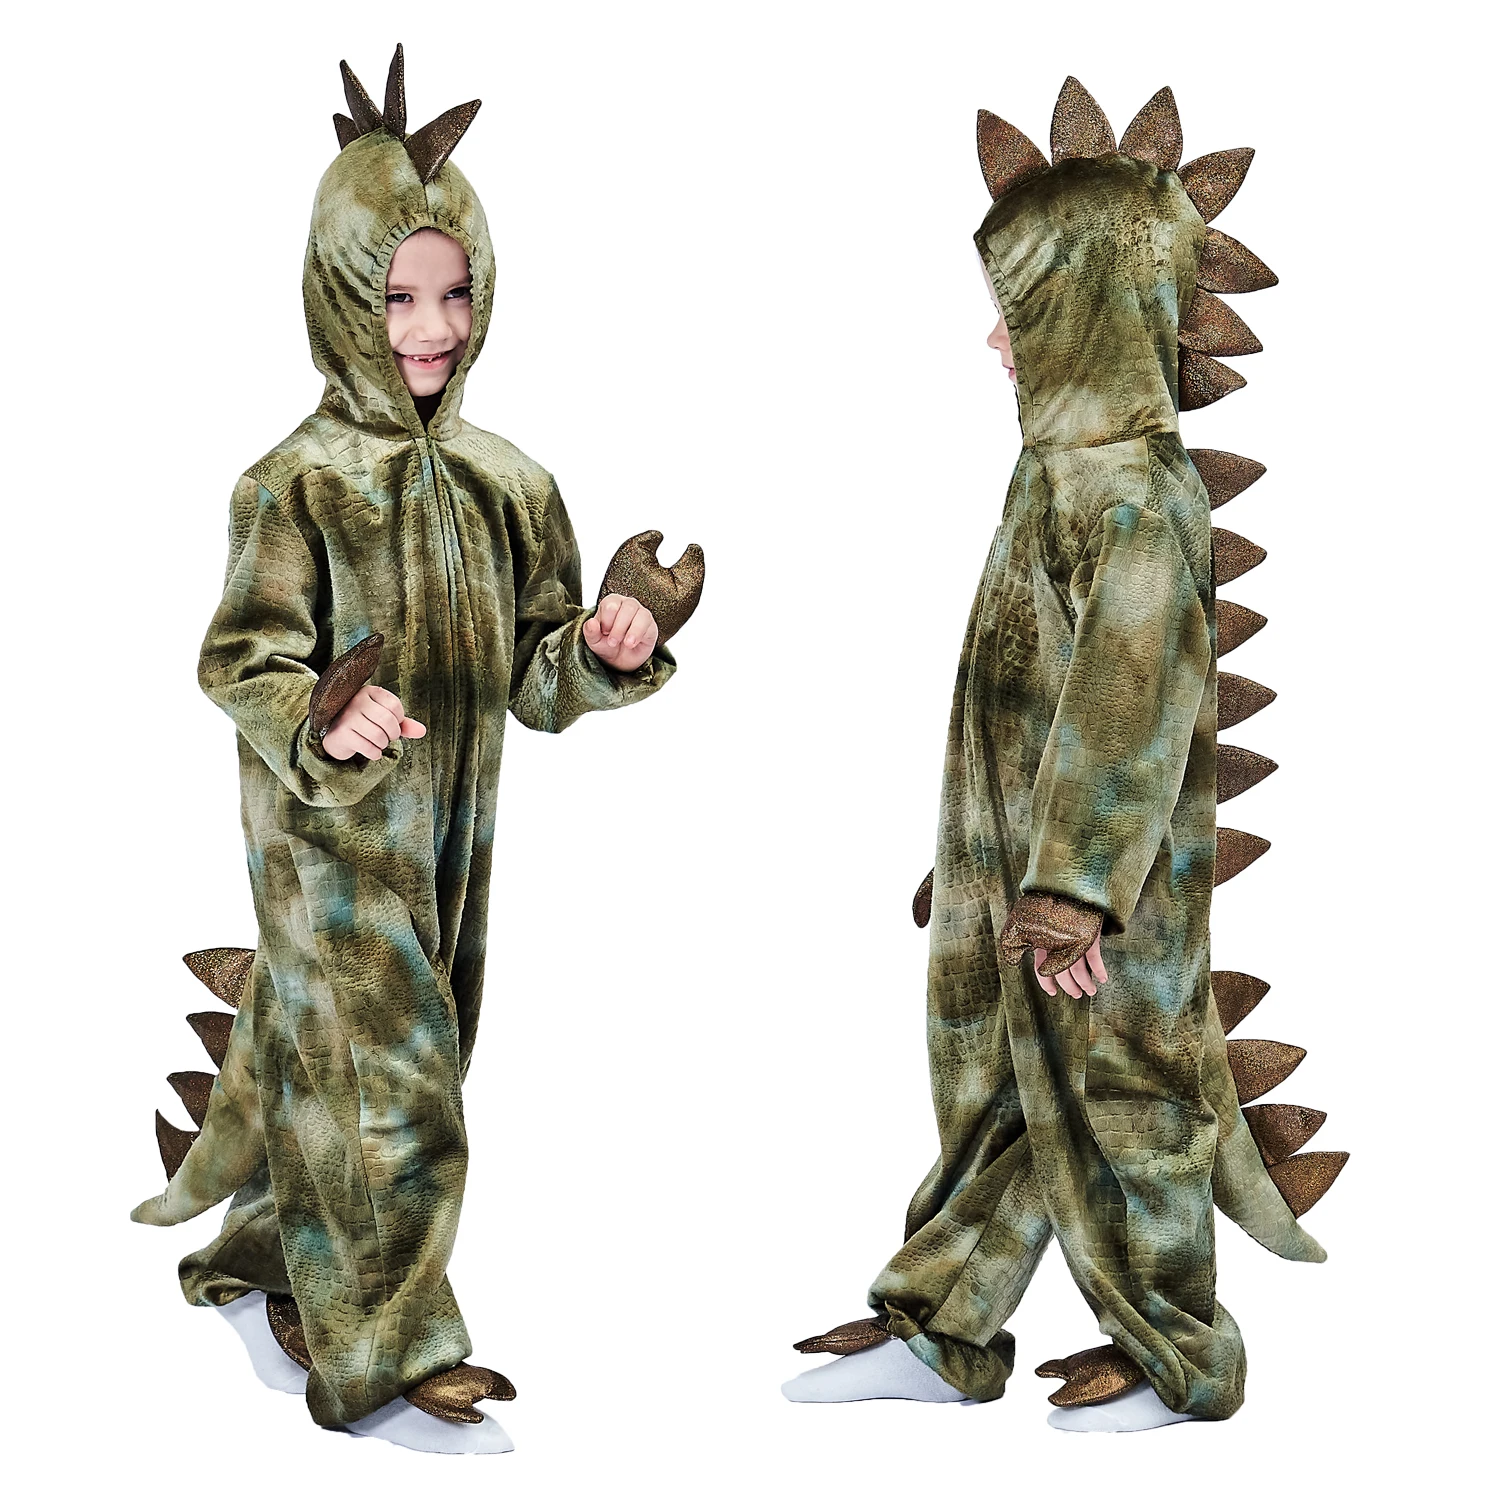 Review Umorden Kids Child Dinosaur T-Rex Costume Cosplay for Boys Halloween Purim Party Disfraz Costumes Fancy Dress Up